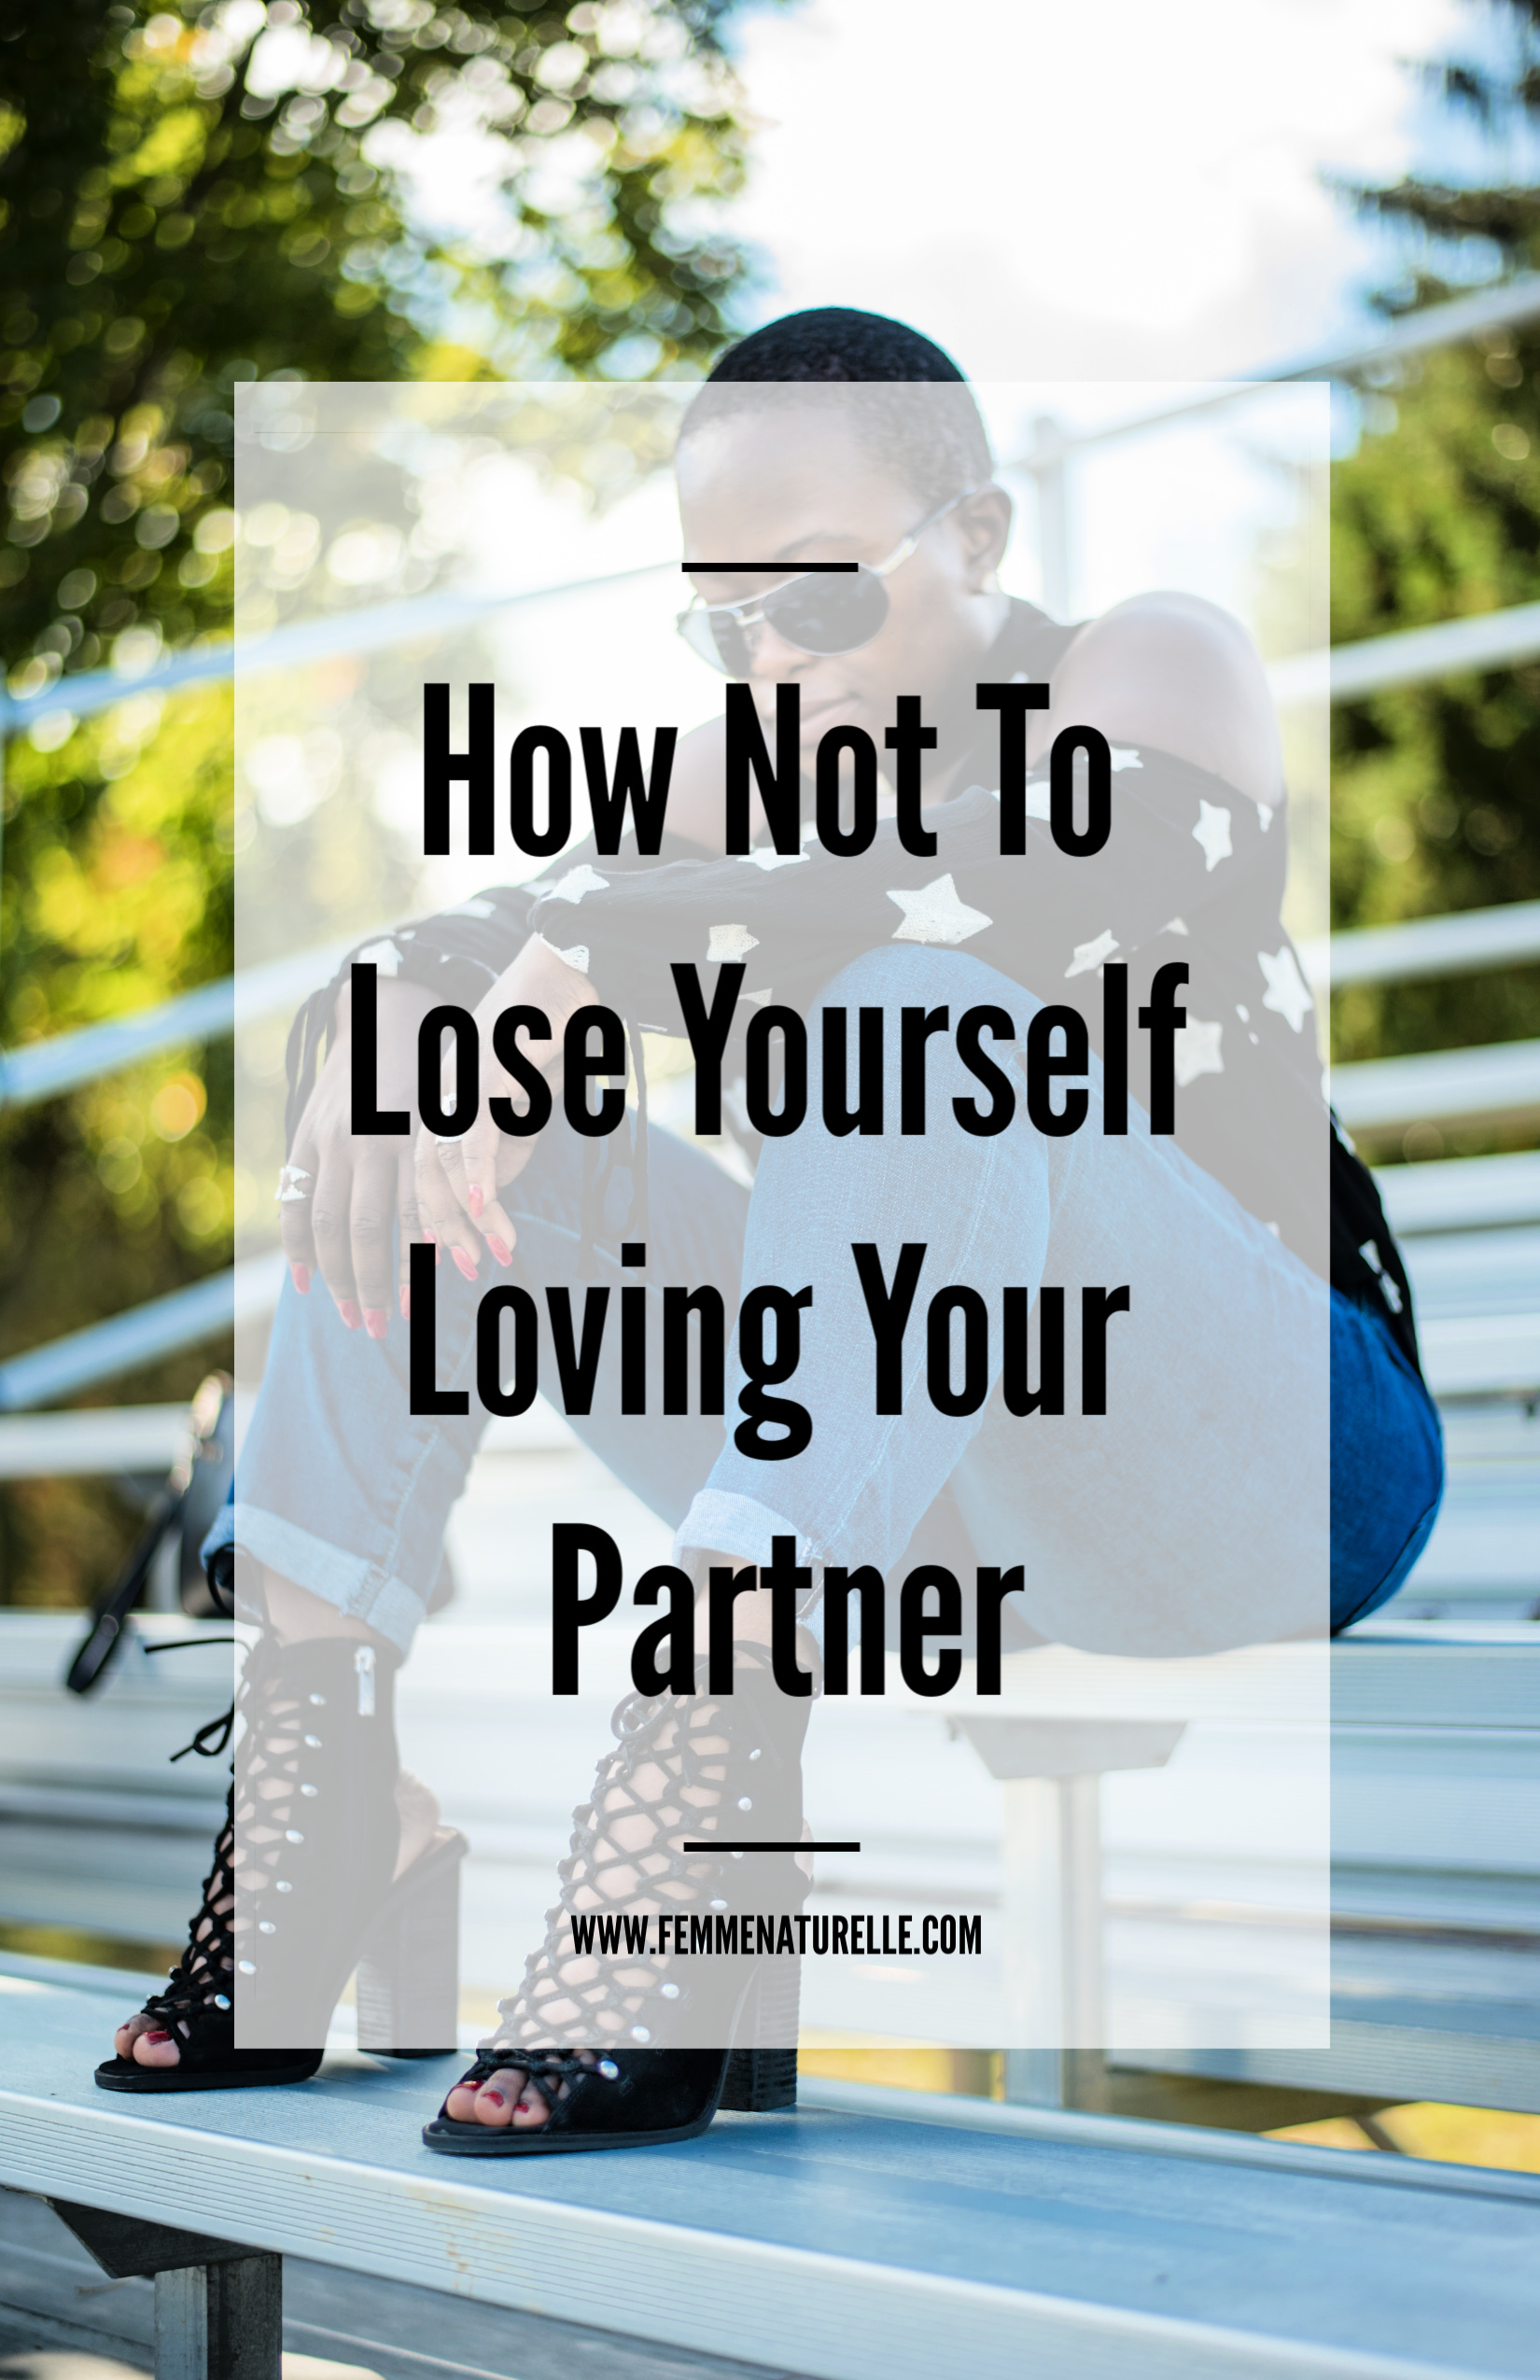 How Not To Lose Yourself Loving Your Partner